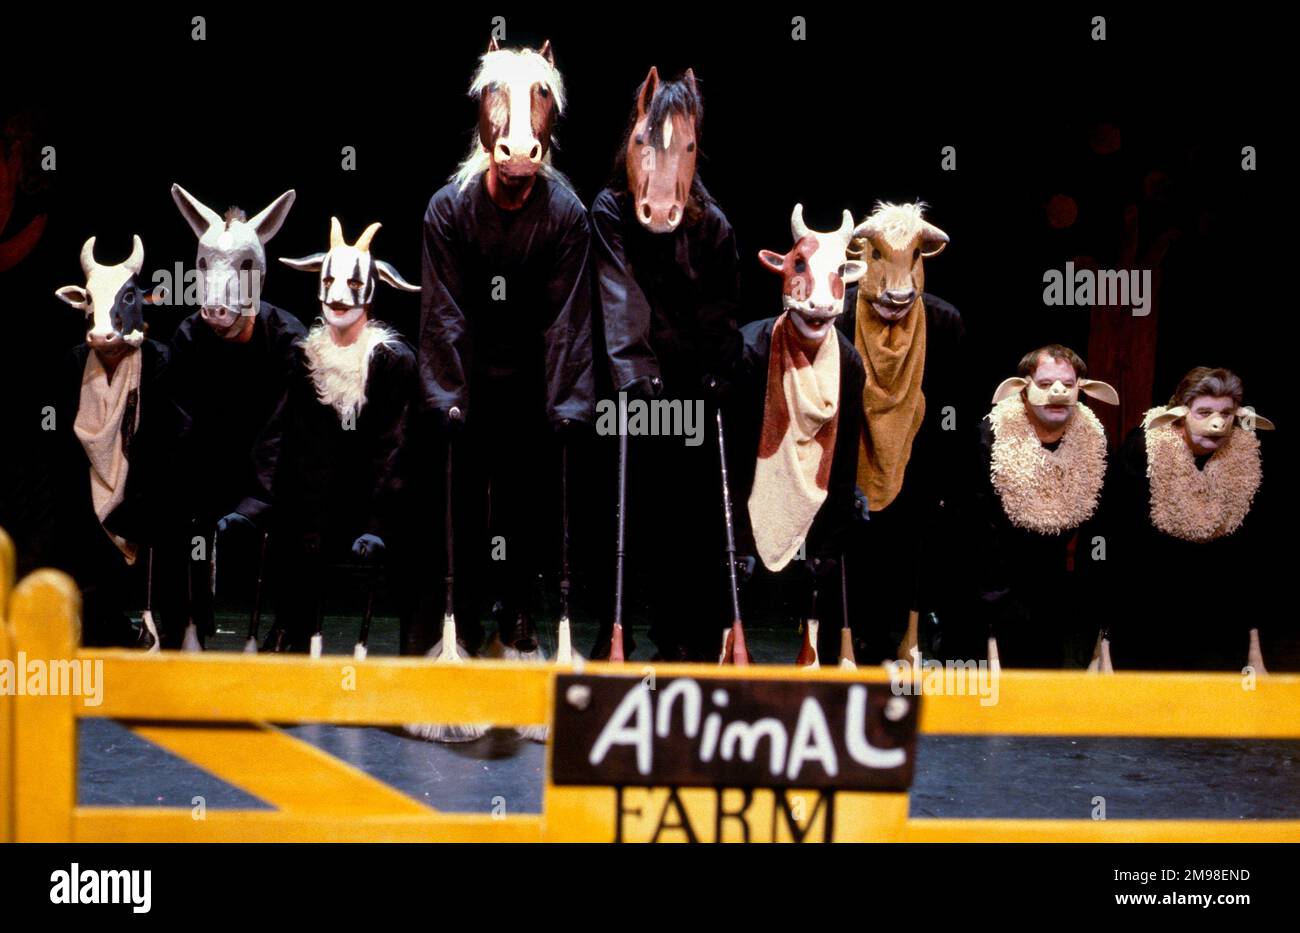 front centre - left: Boxer  right: Clover in ANIMAL FARM by George Orwell at the Cottesloe Theatre, National Theatre (NT), London SE1  25/04/1984  adapted & directed by Peter Hall  design: Jennifer Carey  lighting: John Bury  movement: Stuart Hopps Stock Photo